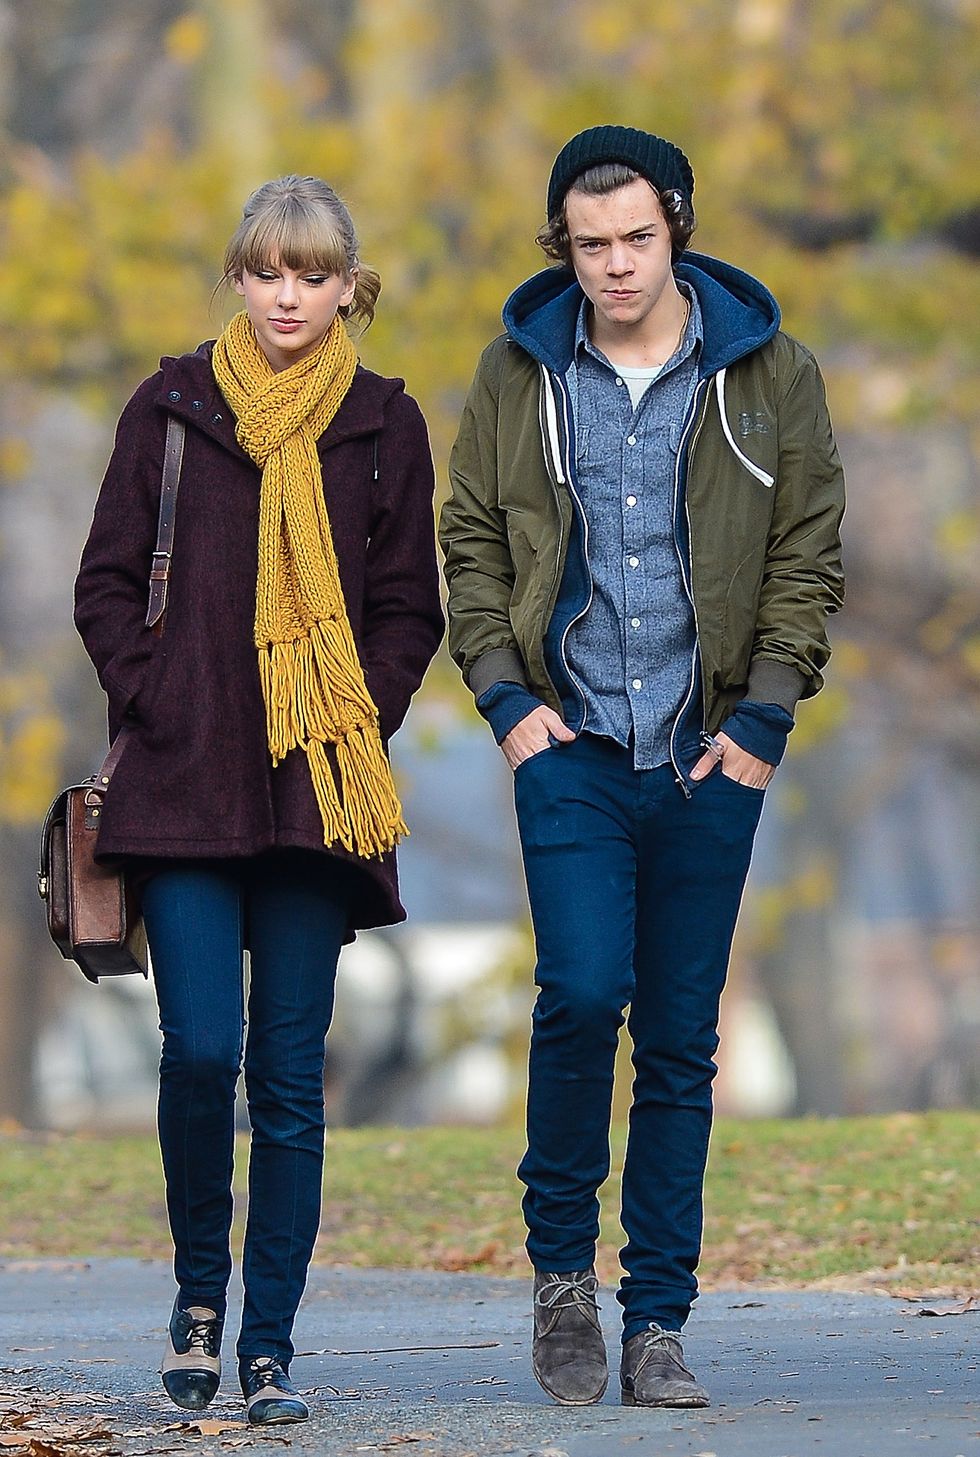 new york, ny december 02 taylor swift and harry styles are seen walking around central park on december 02, 2012 in new york city photo by david kriegerbauer griffingc images